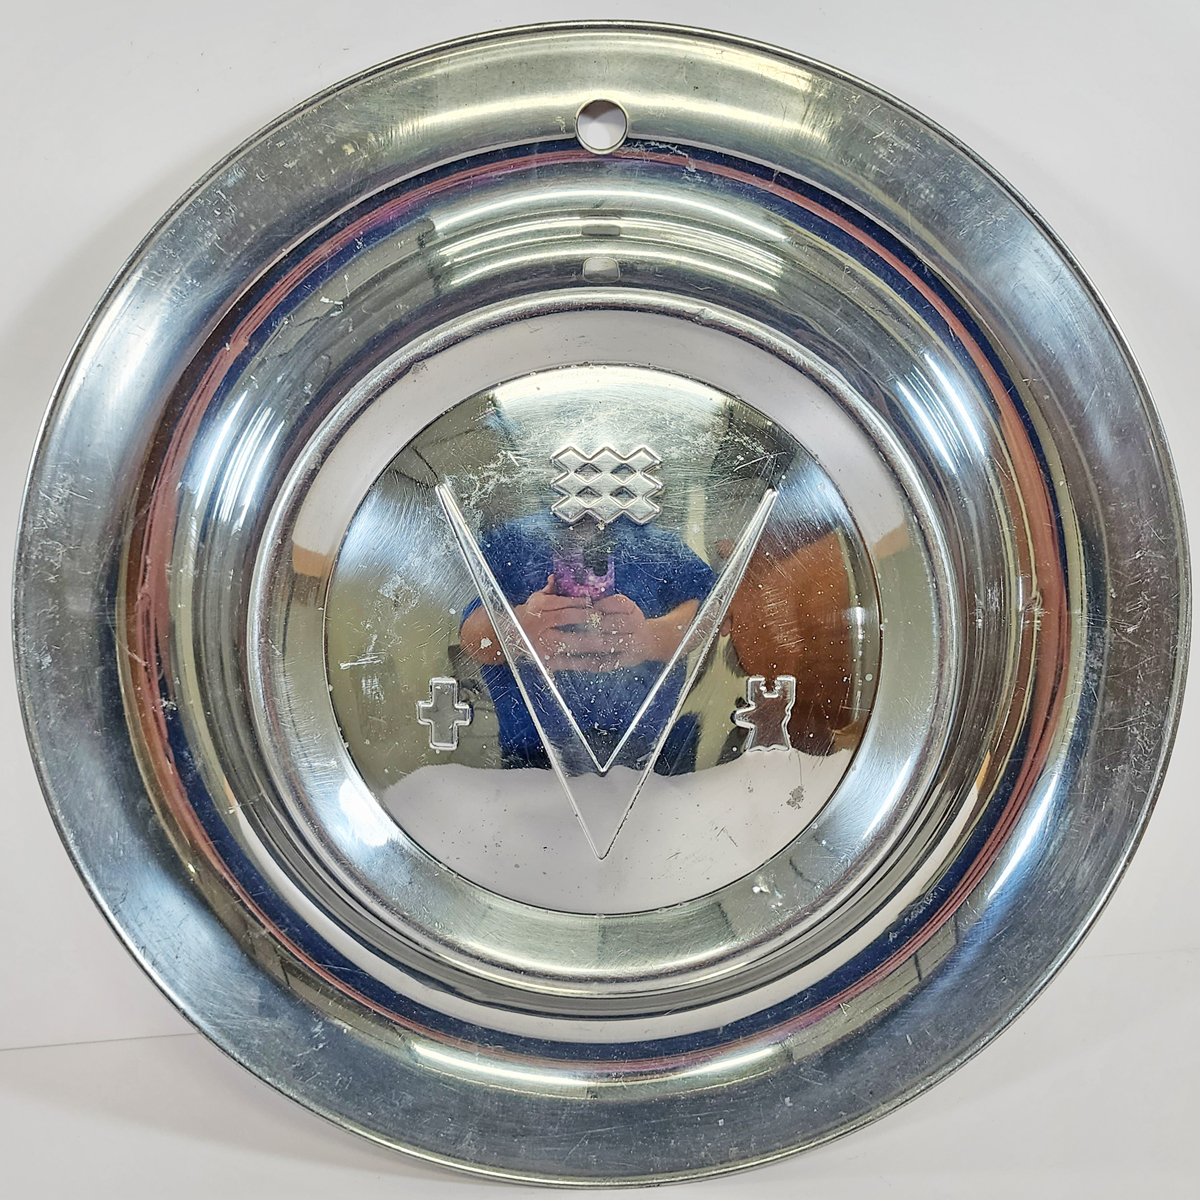 ONE Single 1953 Buick Roadmaster 15" Vintage Chrome Hubcap / Wheel Cover USED - $49.99